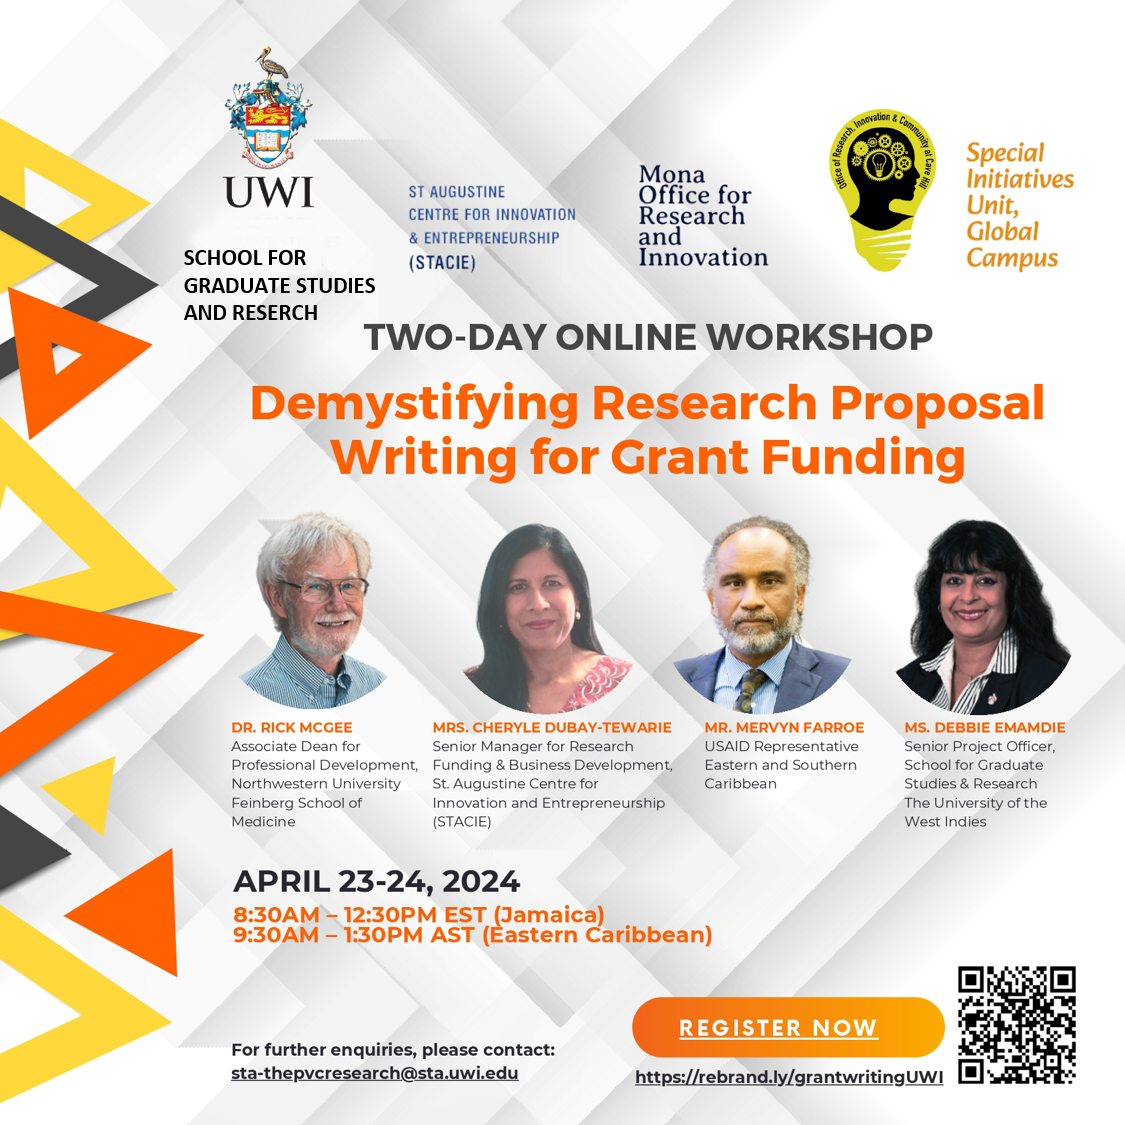 Demystifying Research Proposal Writing for Grant Funding